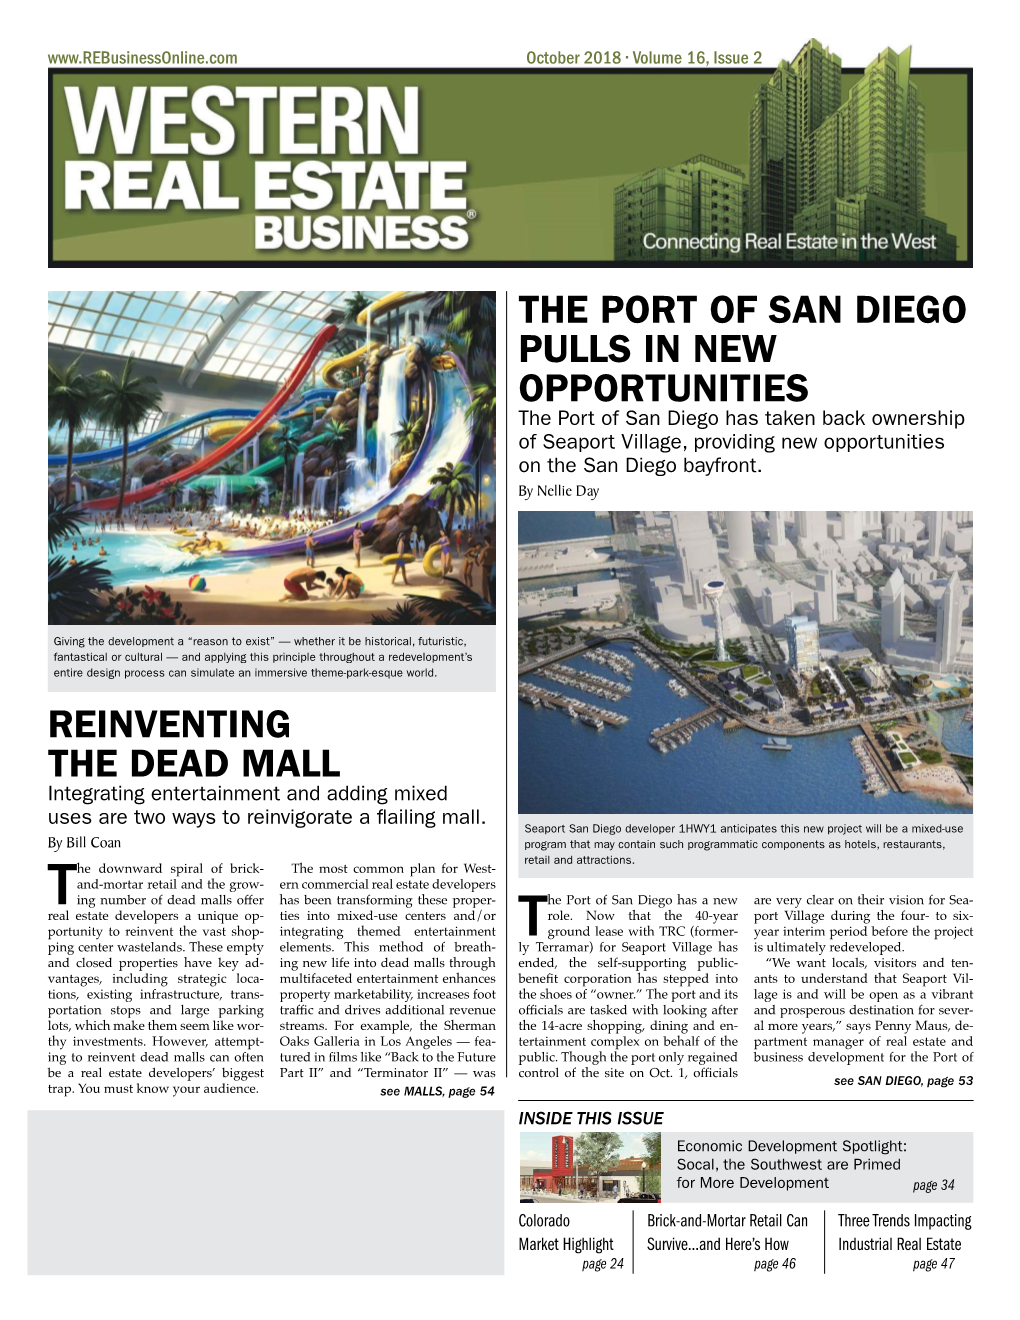 Reinventing the Dead Mall the Port of San Diego Pulls In